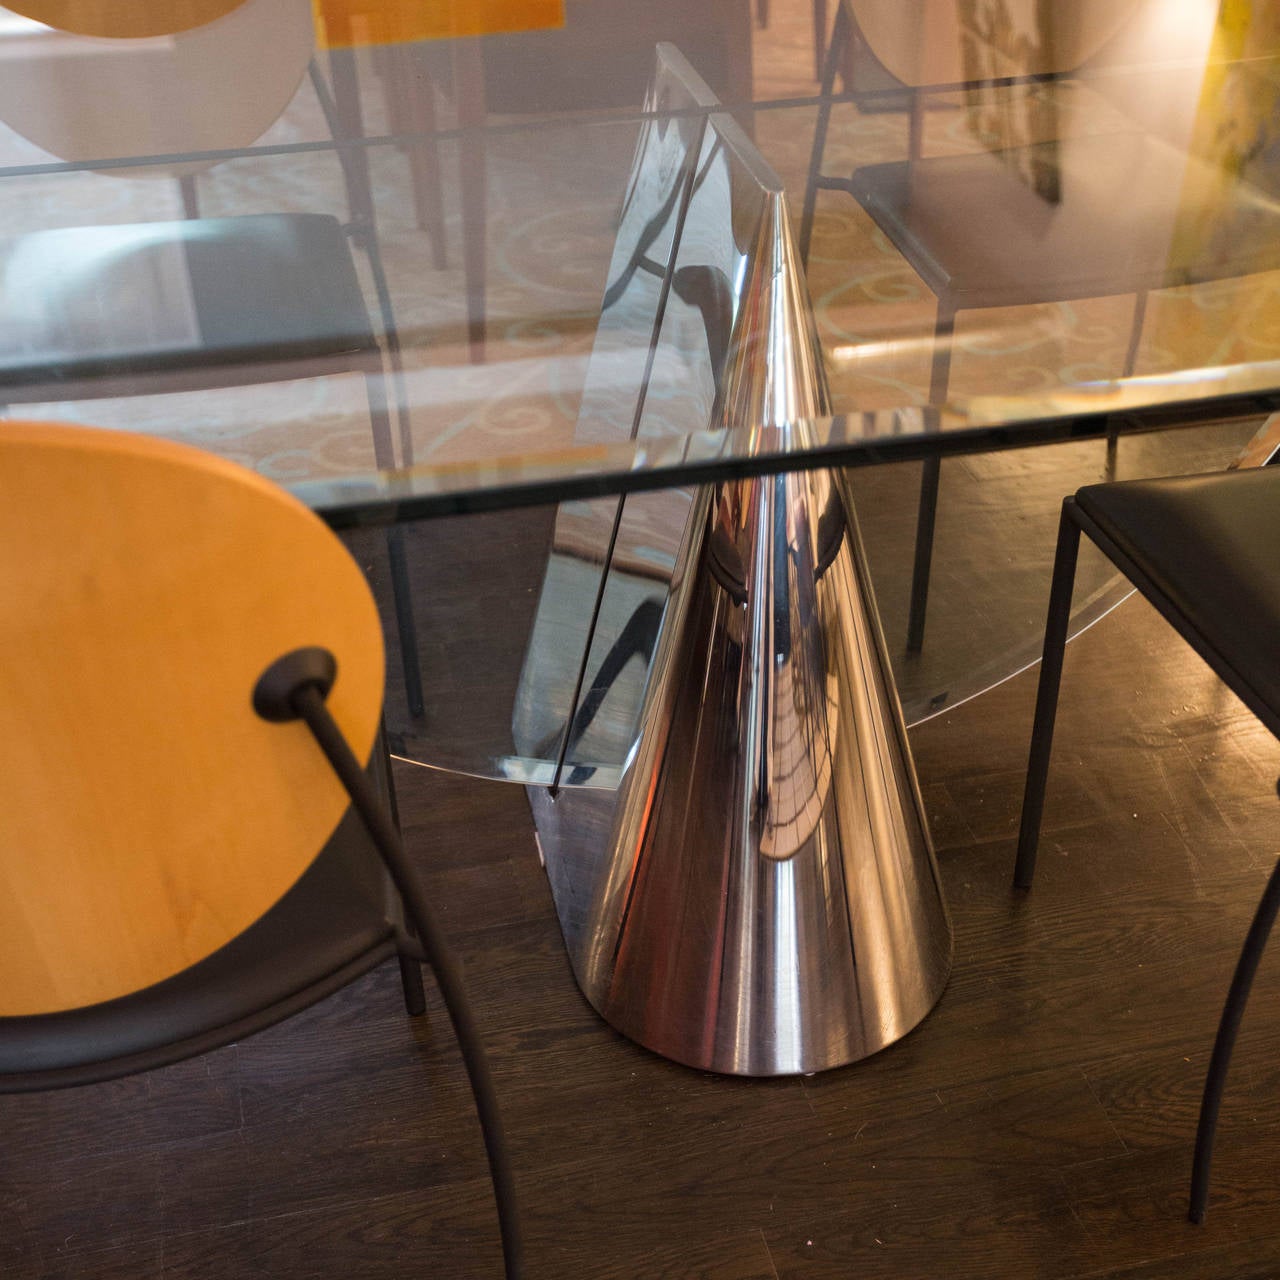 This is the Pinnacle Table designed by J. Wade Beam for Brueton. This classic modern design features a polished stainless steel conical center pedestal intersected by 3/4